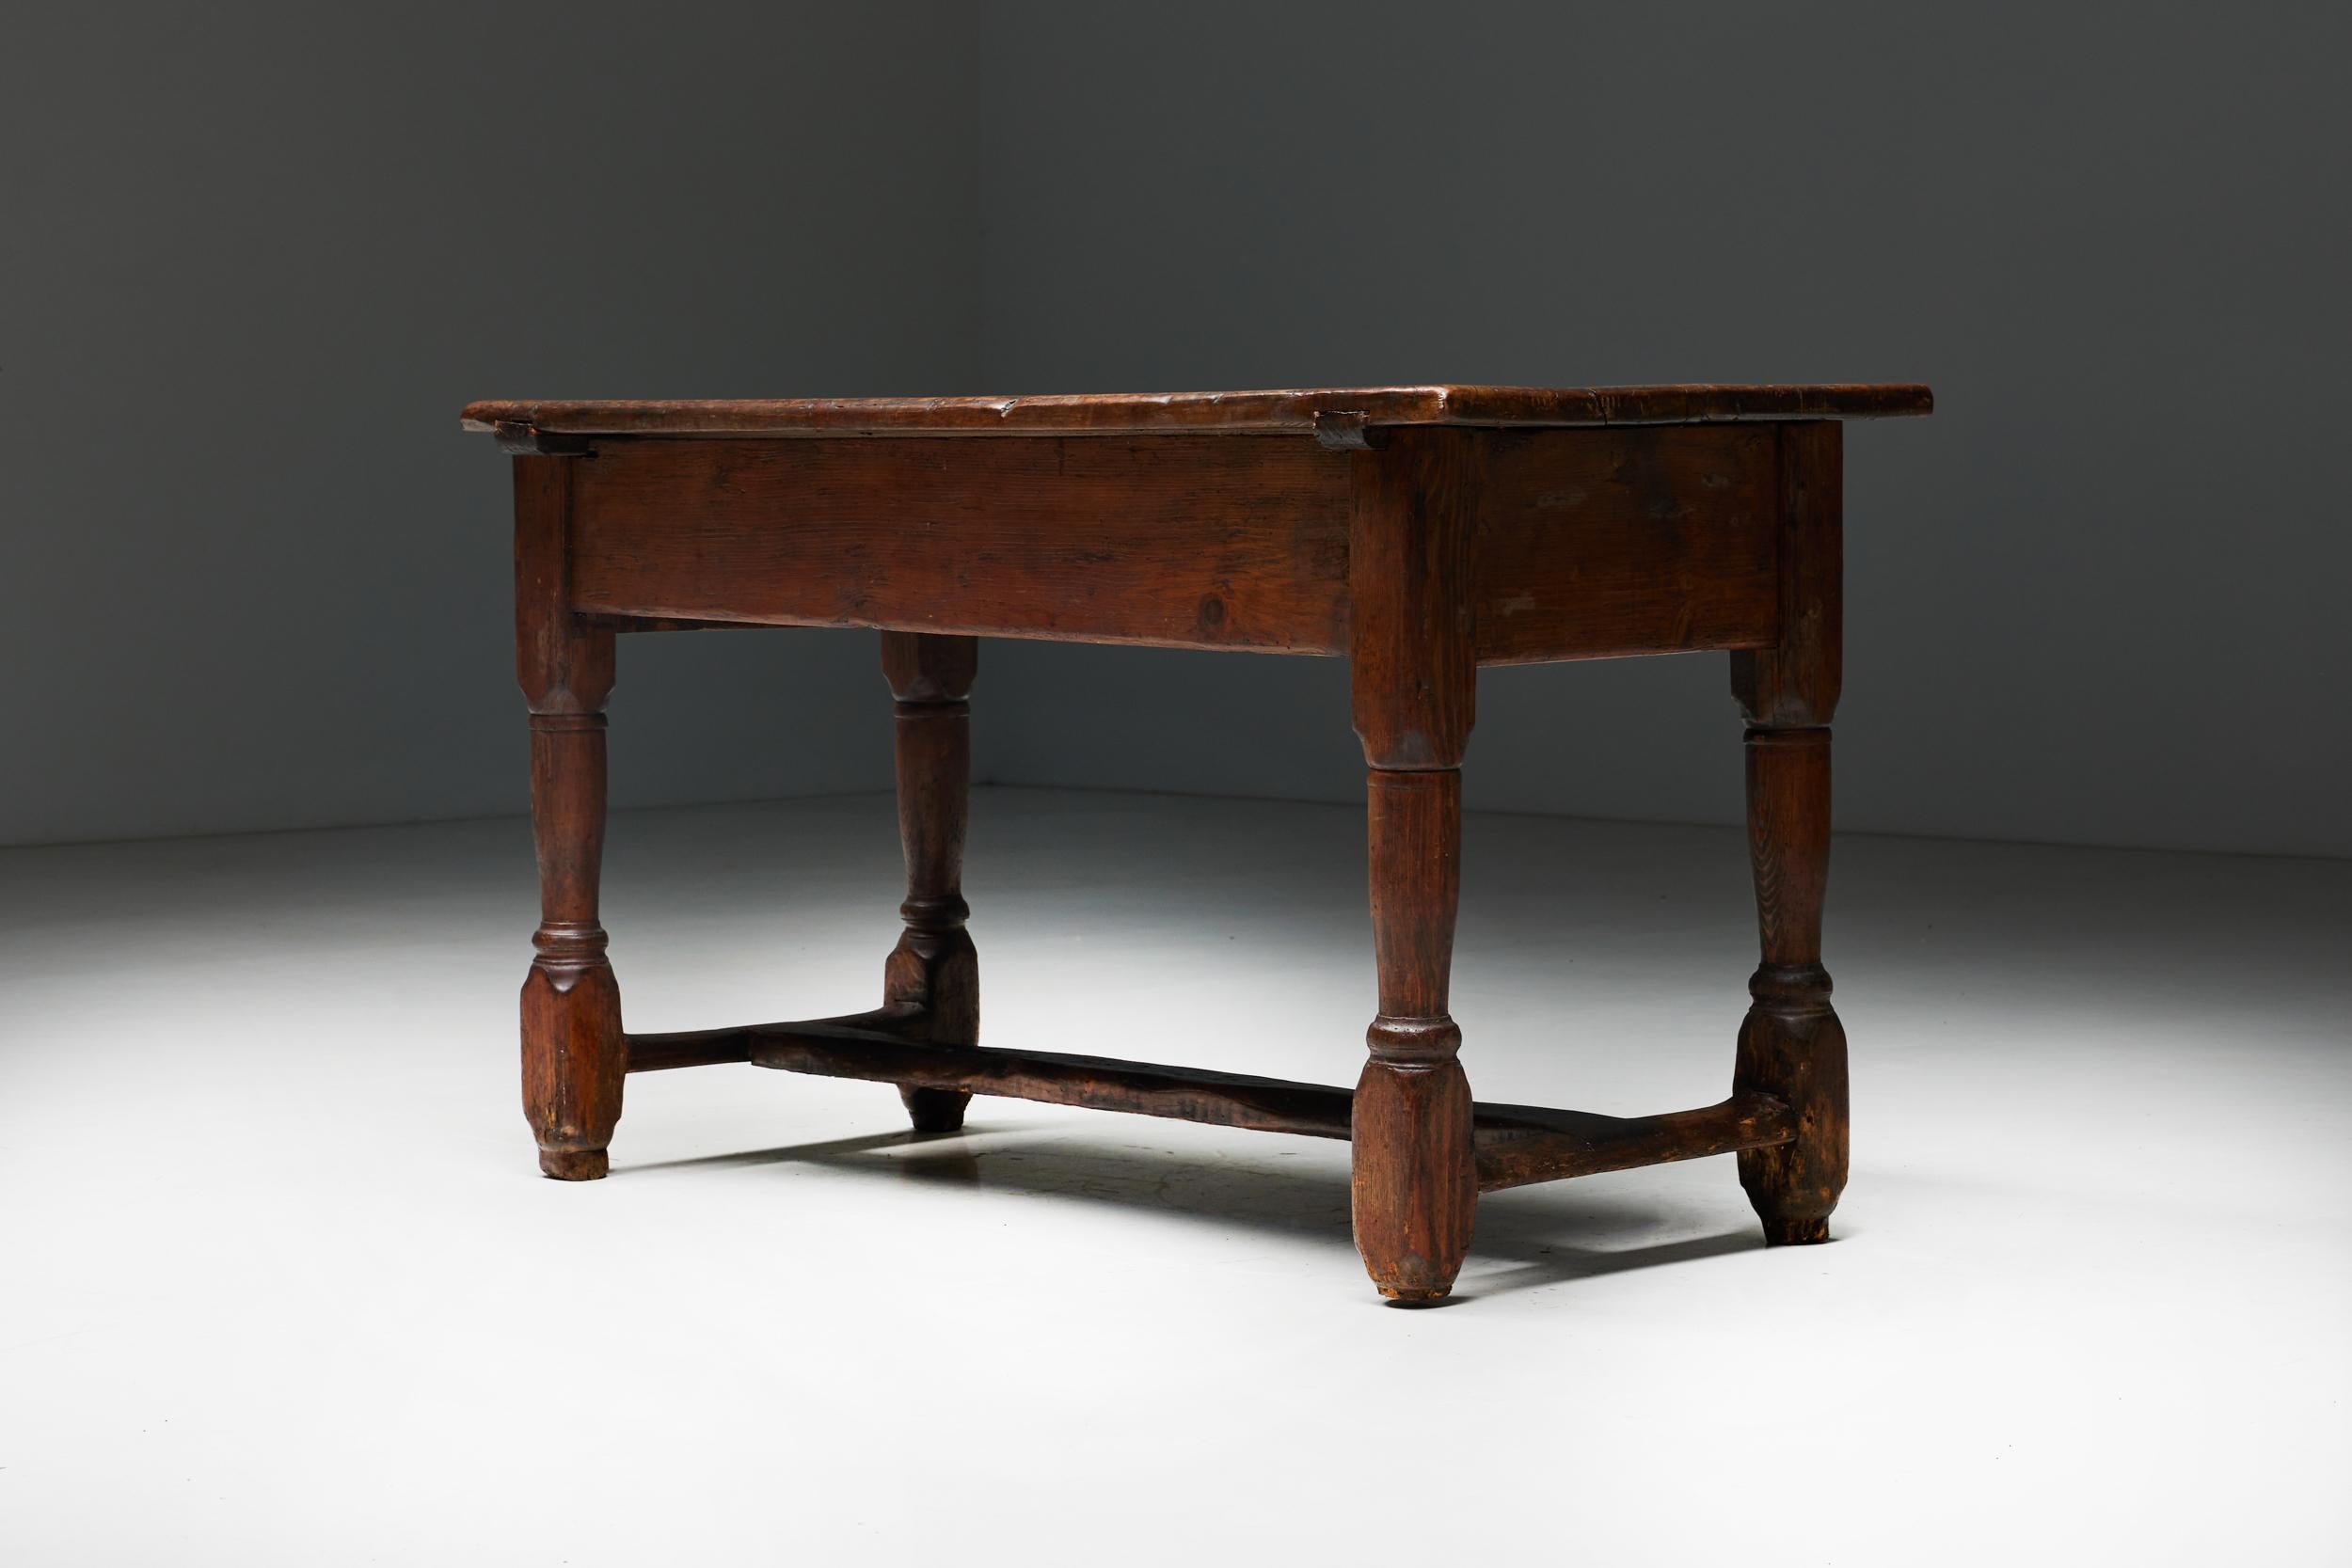 Rustic Art Populaire Writing Table, France, Early 20th Century For Sale 6